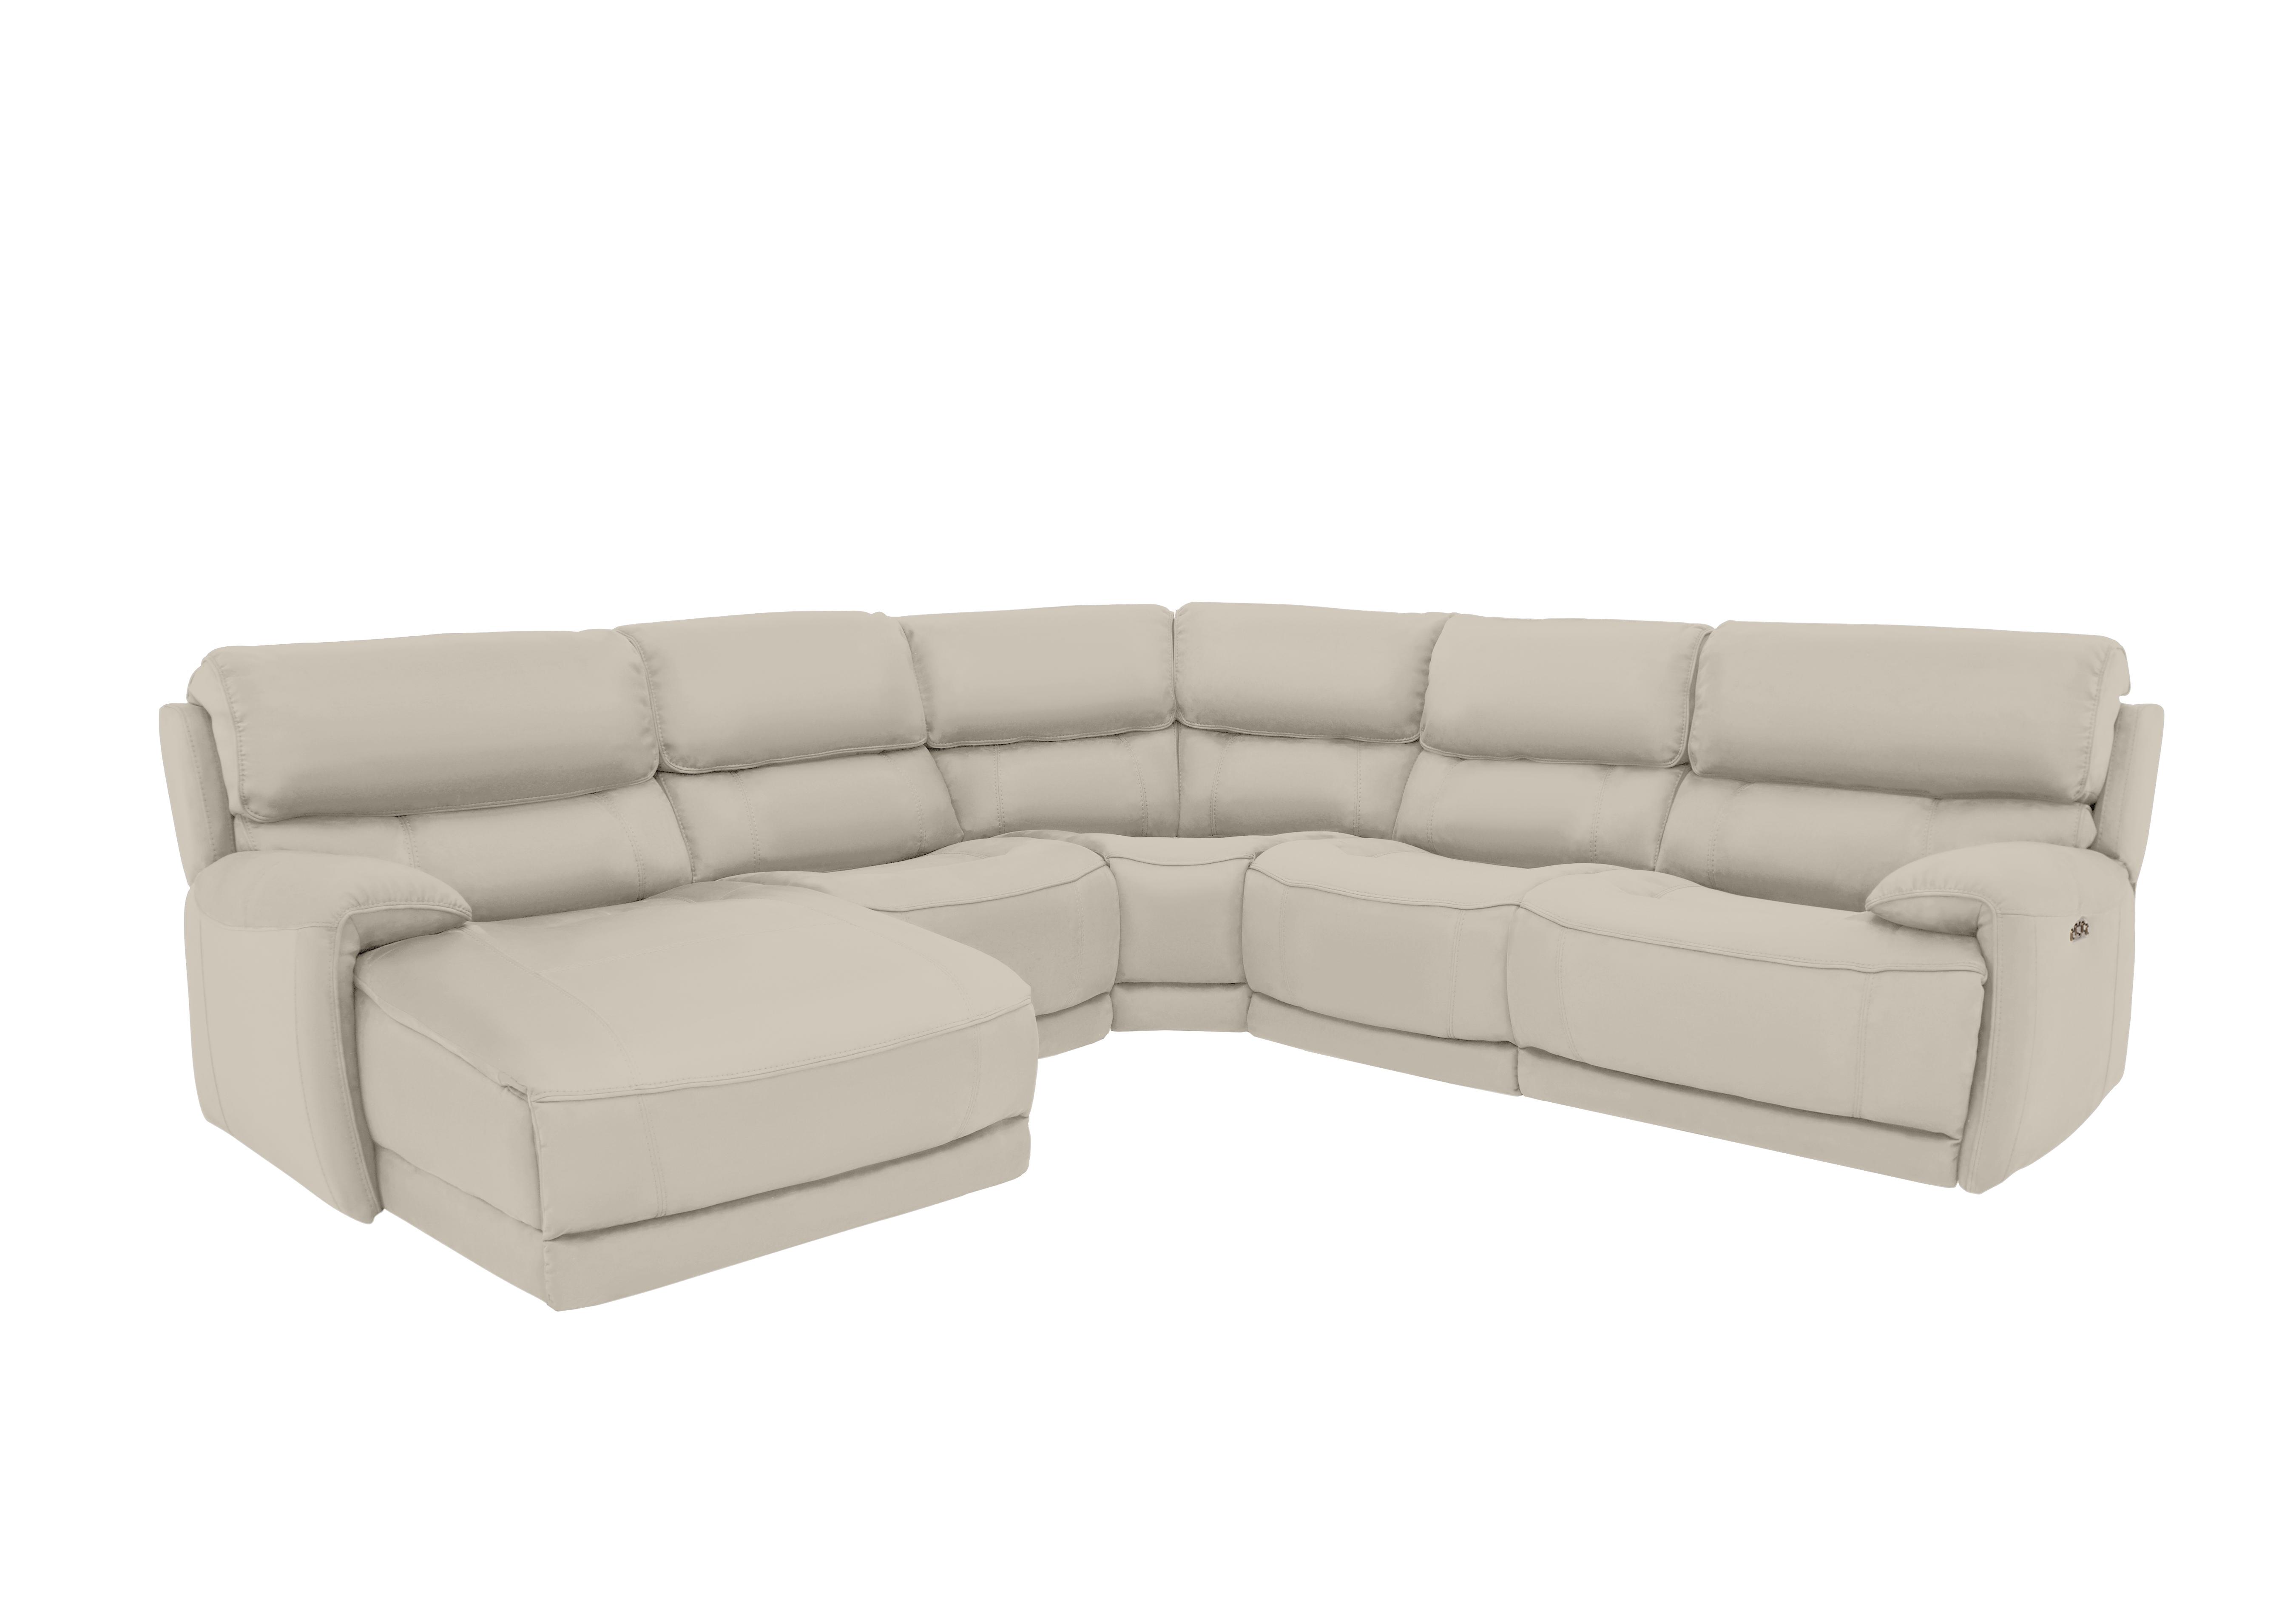 Link Leather Corner Chaise Power Sofa in Bv-946b Silver Grey on Furniture Village